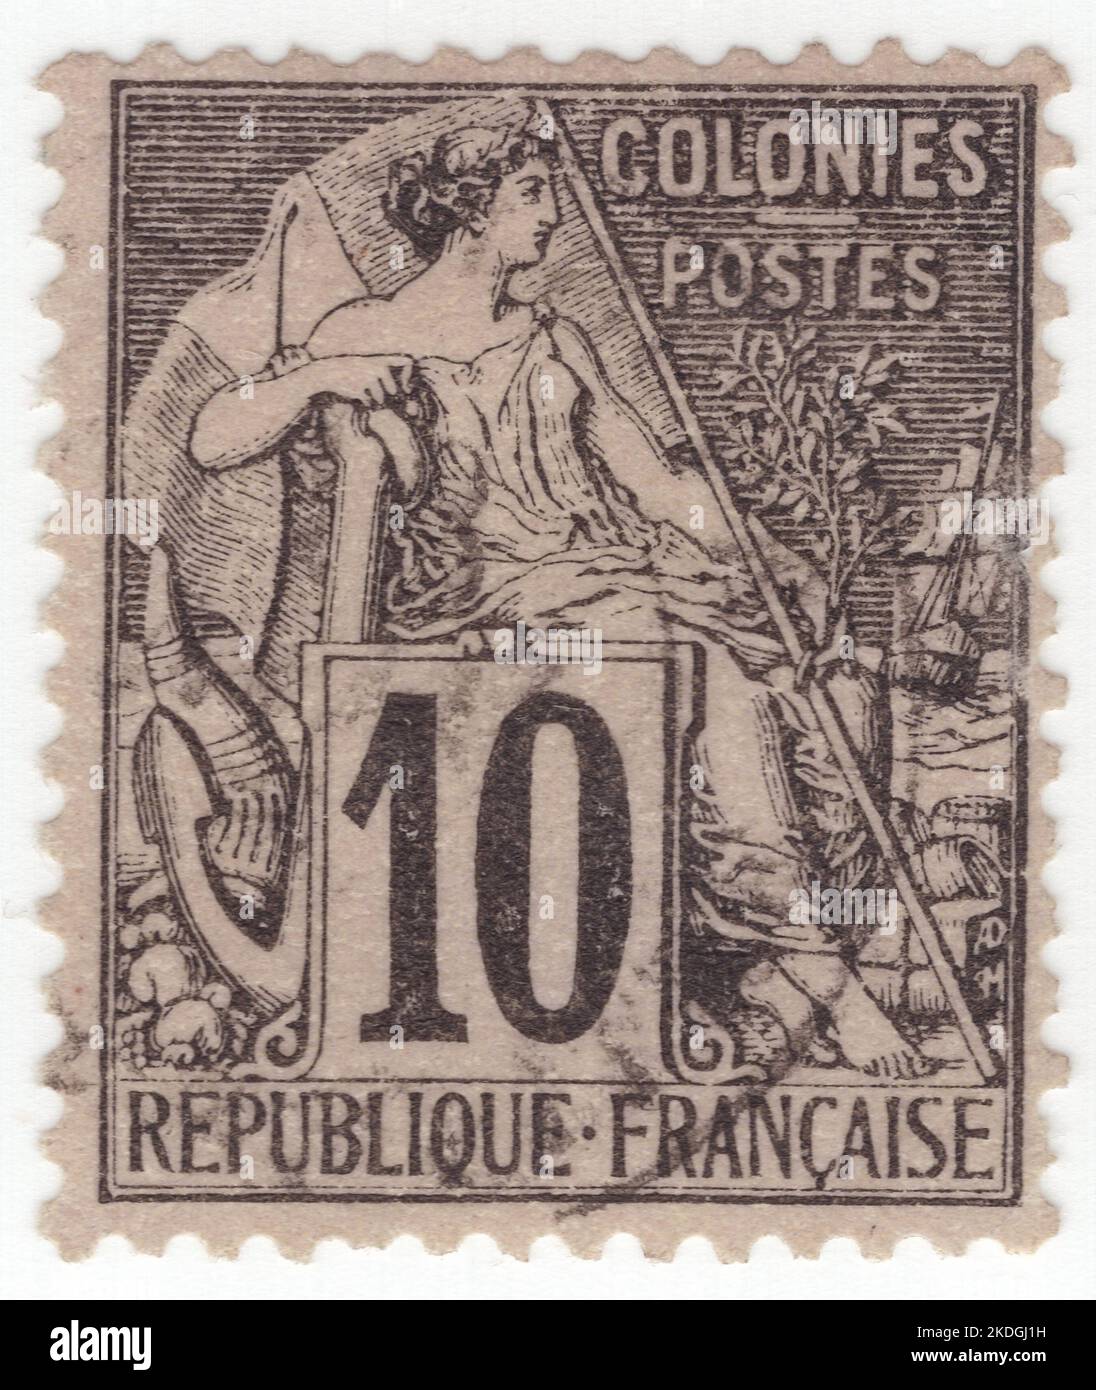 FRENCH COLONIES - 1881: An 10 centimes black on lavender postage stamp depicting allegory female figure 'Commerce' sitting alone and inscribed 'COLONIES'. Series French Colonies by Alphee Dubois Stock Photo